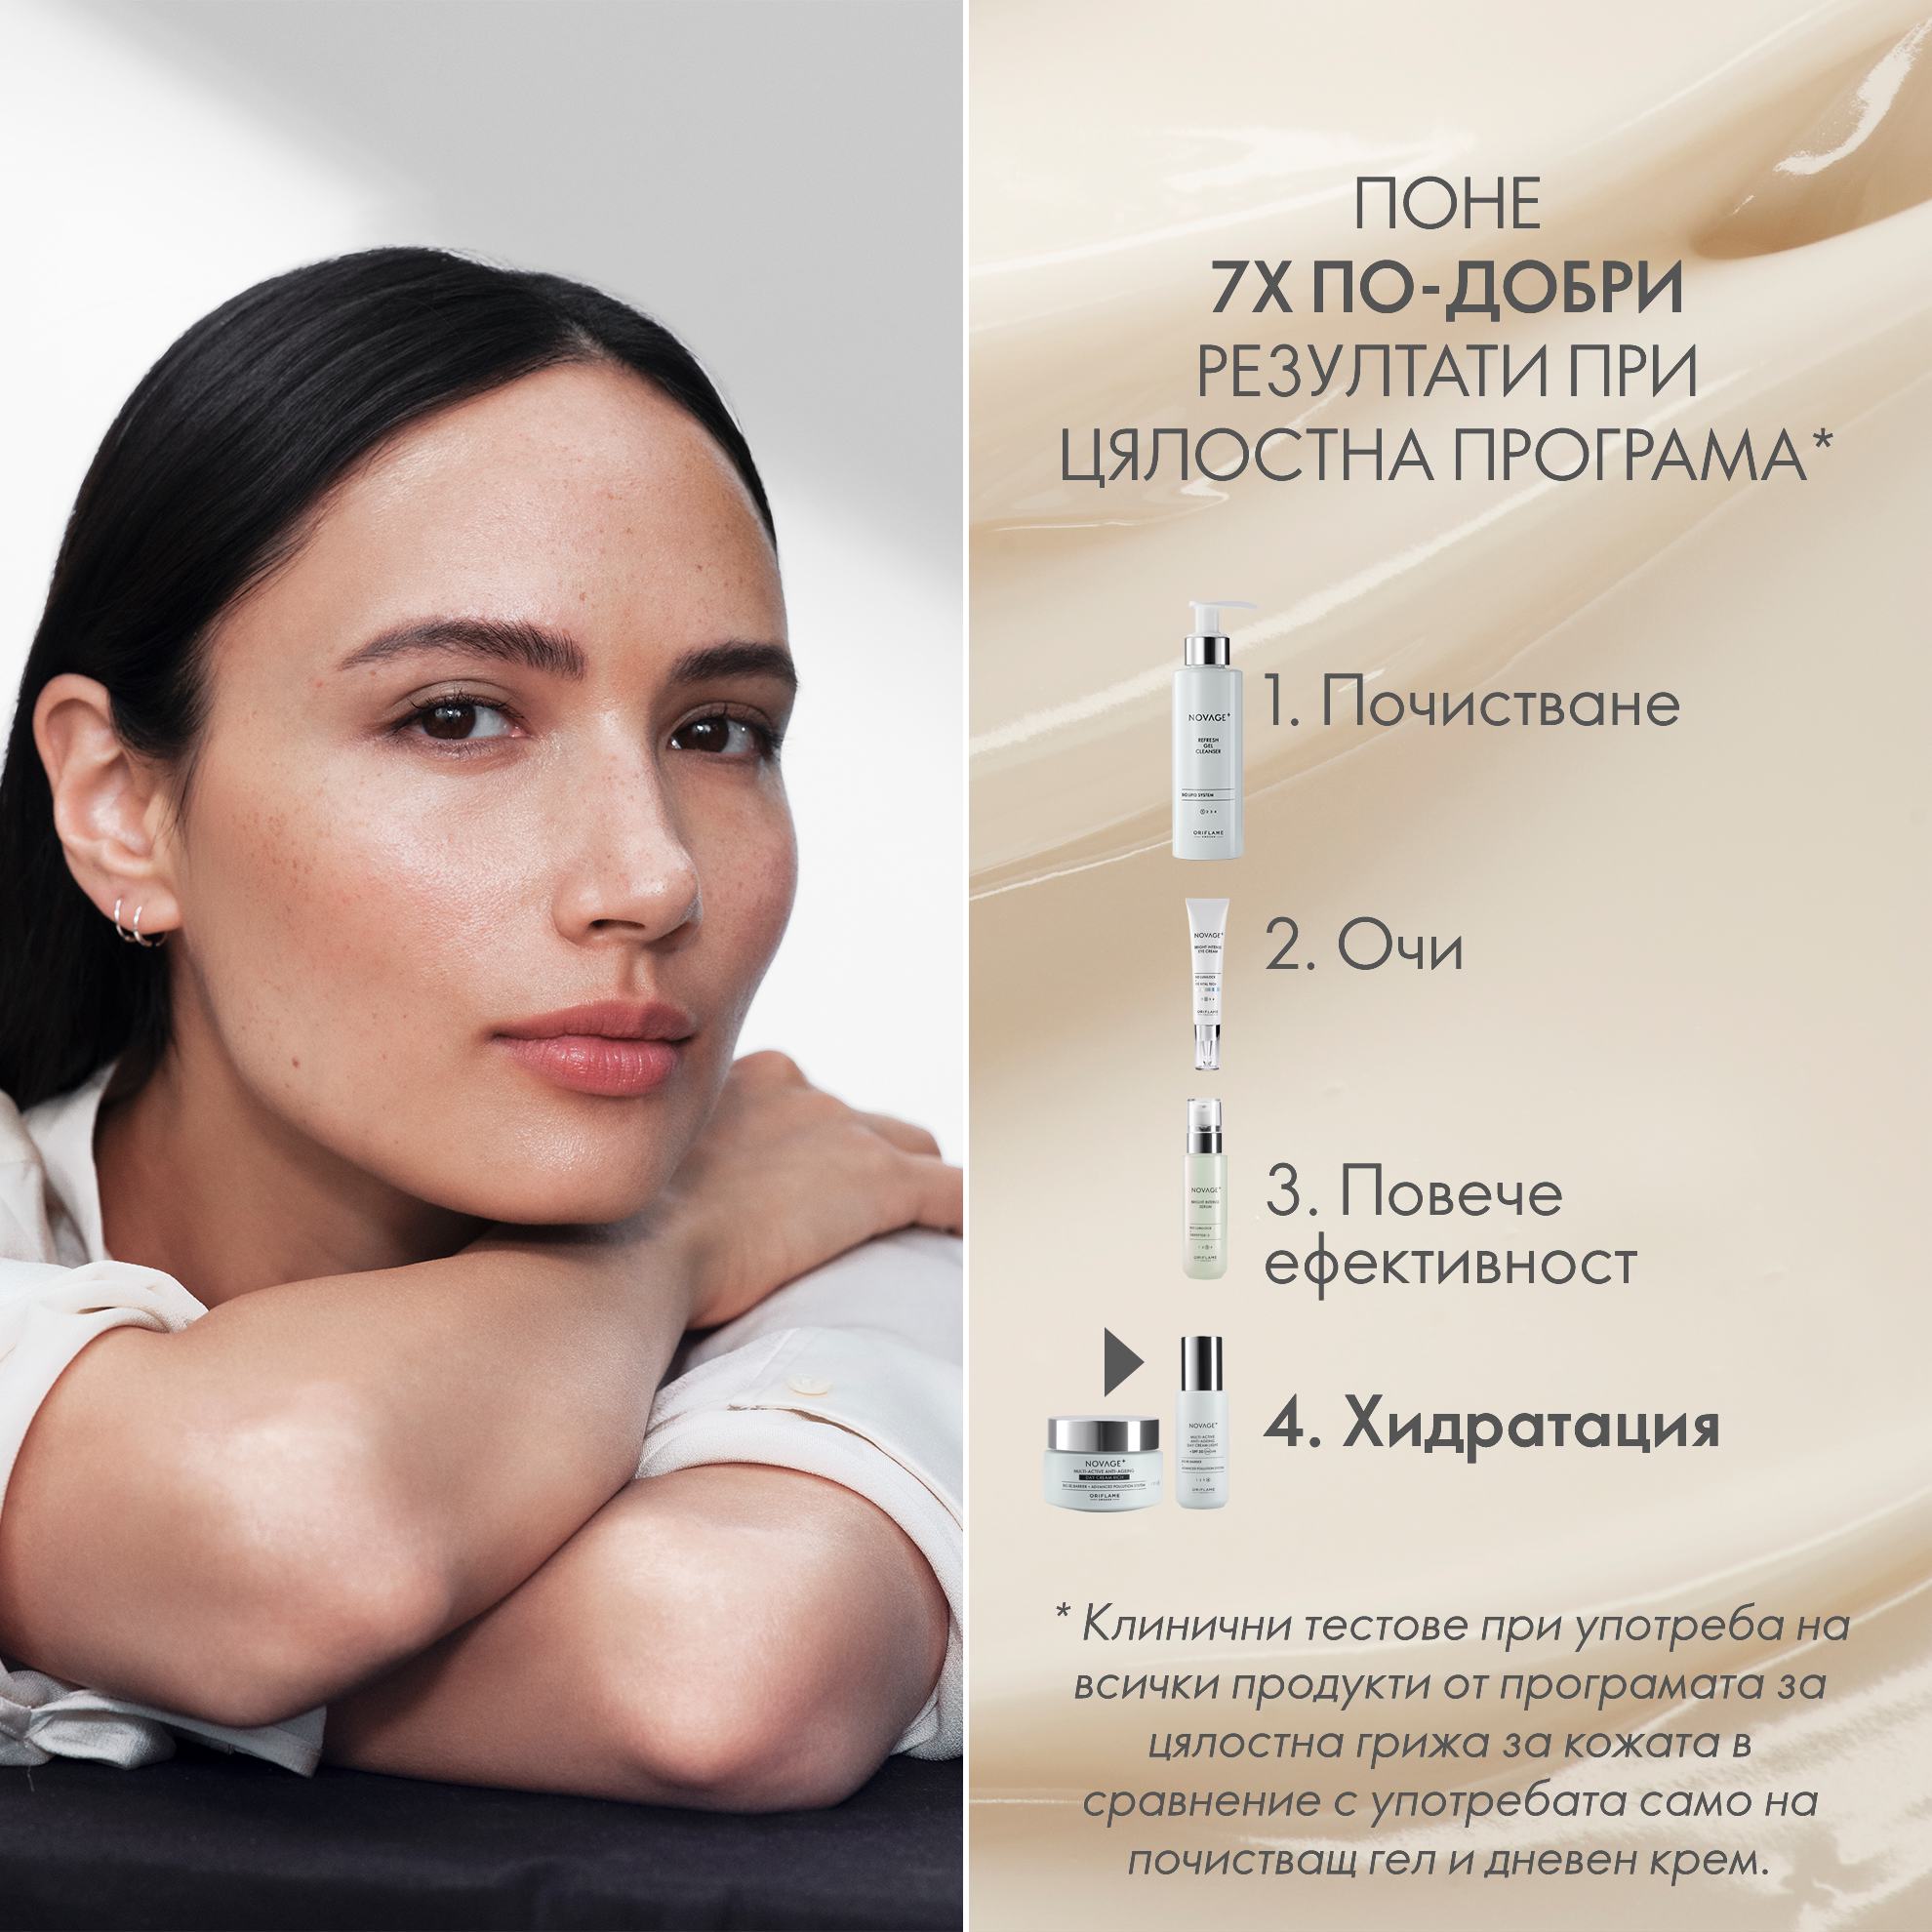 https://media-cdn.oriflame.com/productImage?externalMediaId=product-management-media%2fProducts%2f41047%2fBG%2f41047_5.png&id=17554993&version=1